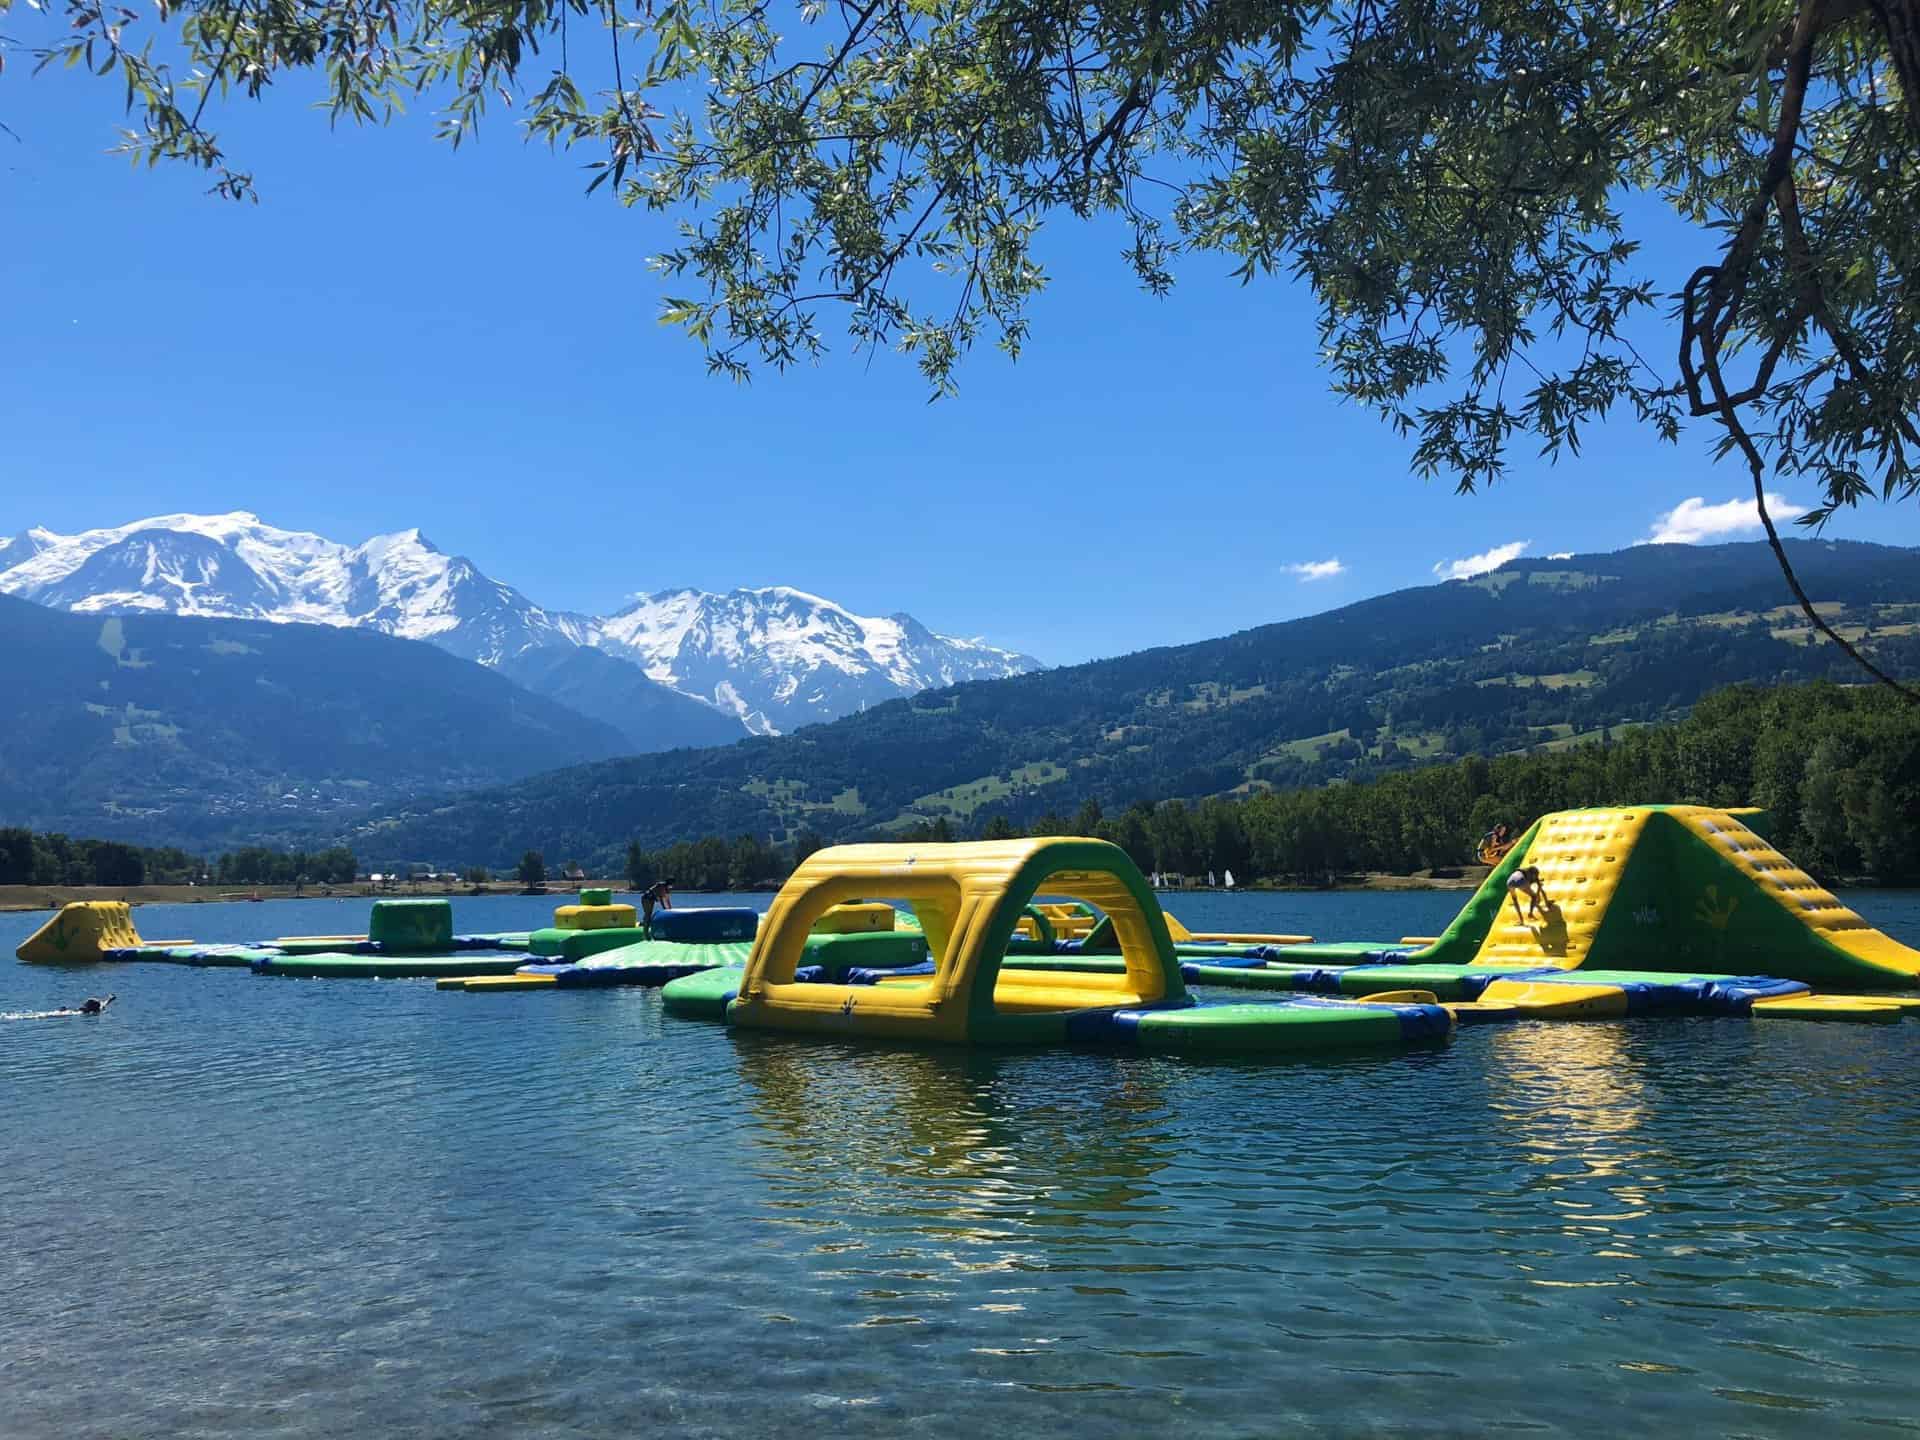 An inflatable and floating assault course at Lac de Passy, with mountains in the background